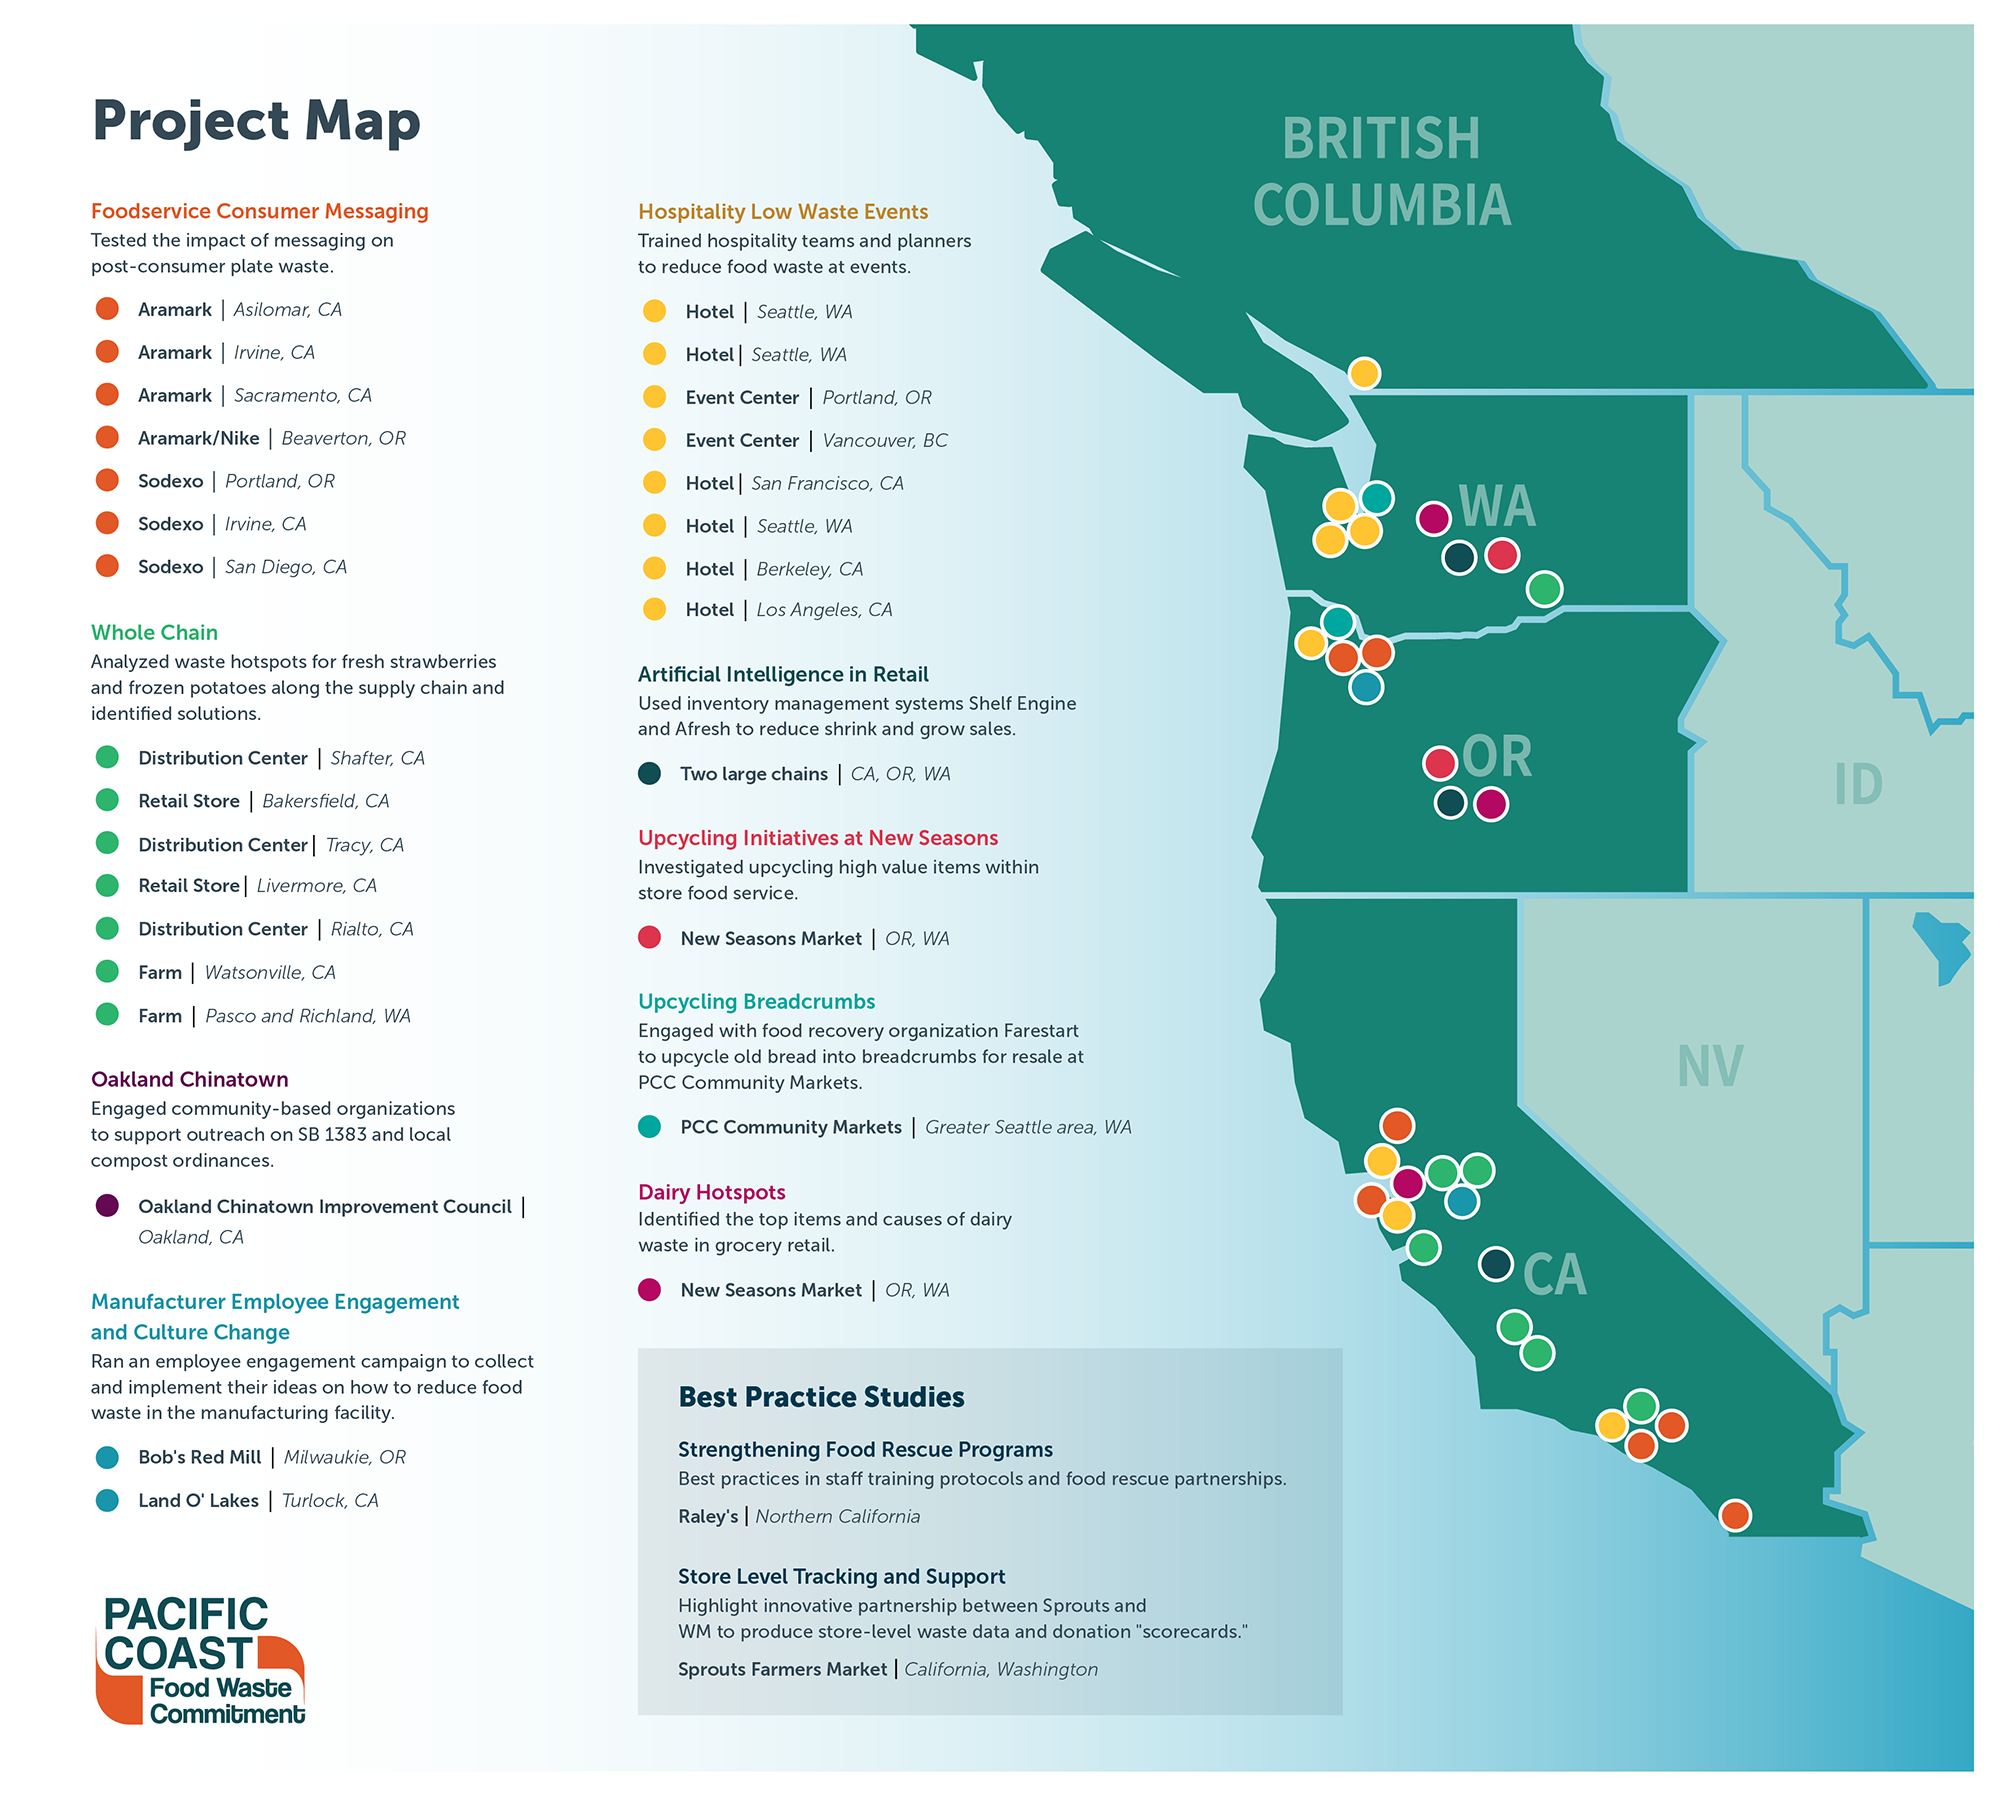 Pacific Coast Food Waste Commitment project map